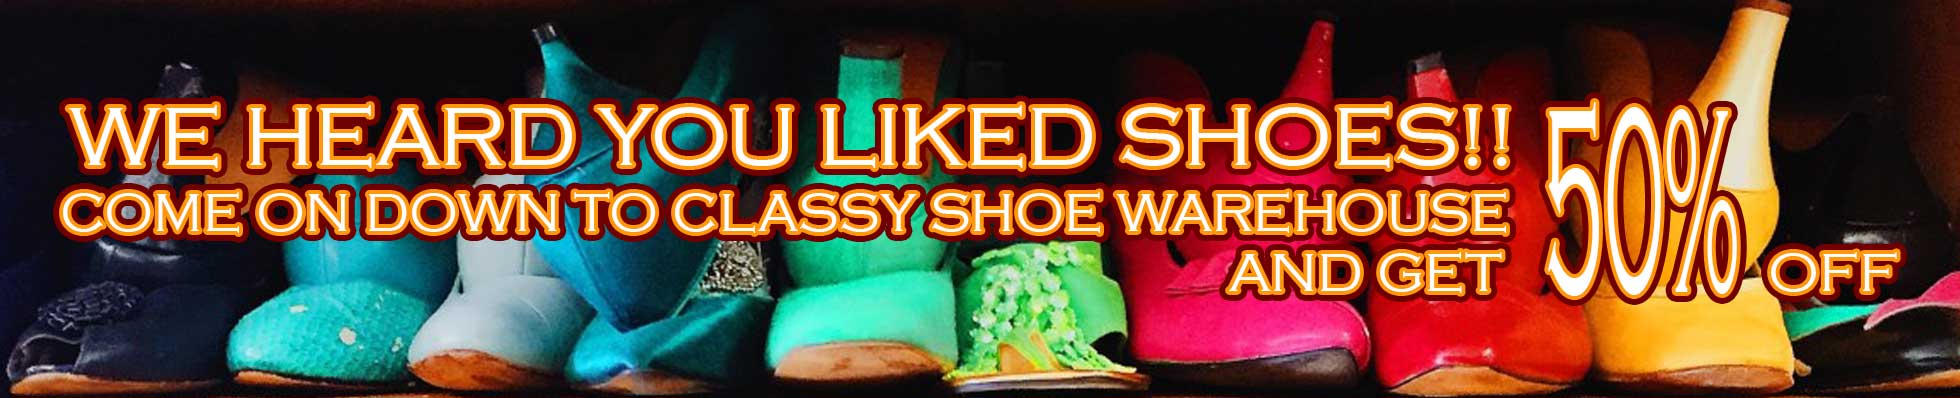 Fake ad describing We heard you liked shoes! Come on down to classy shoe warehouse and get 50% off